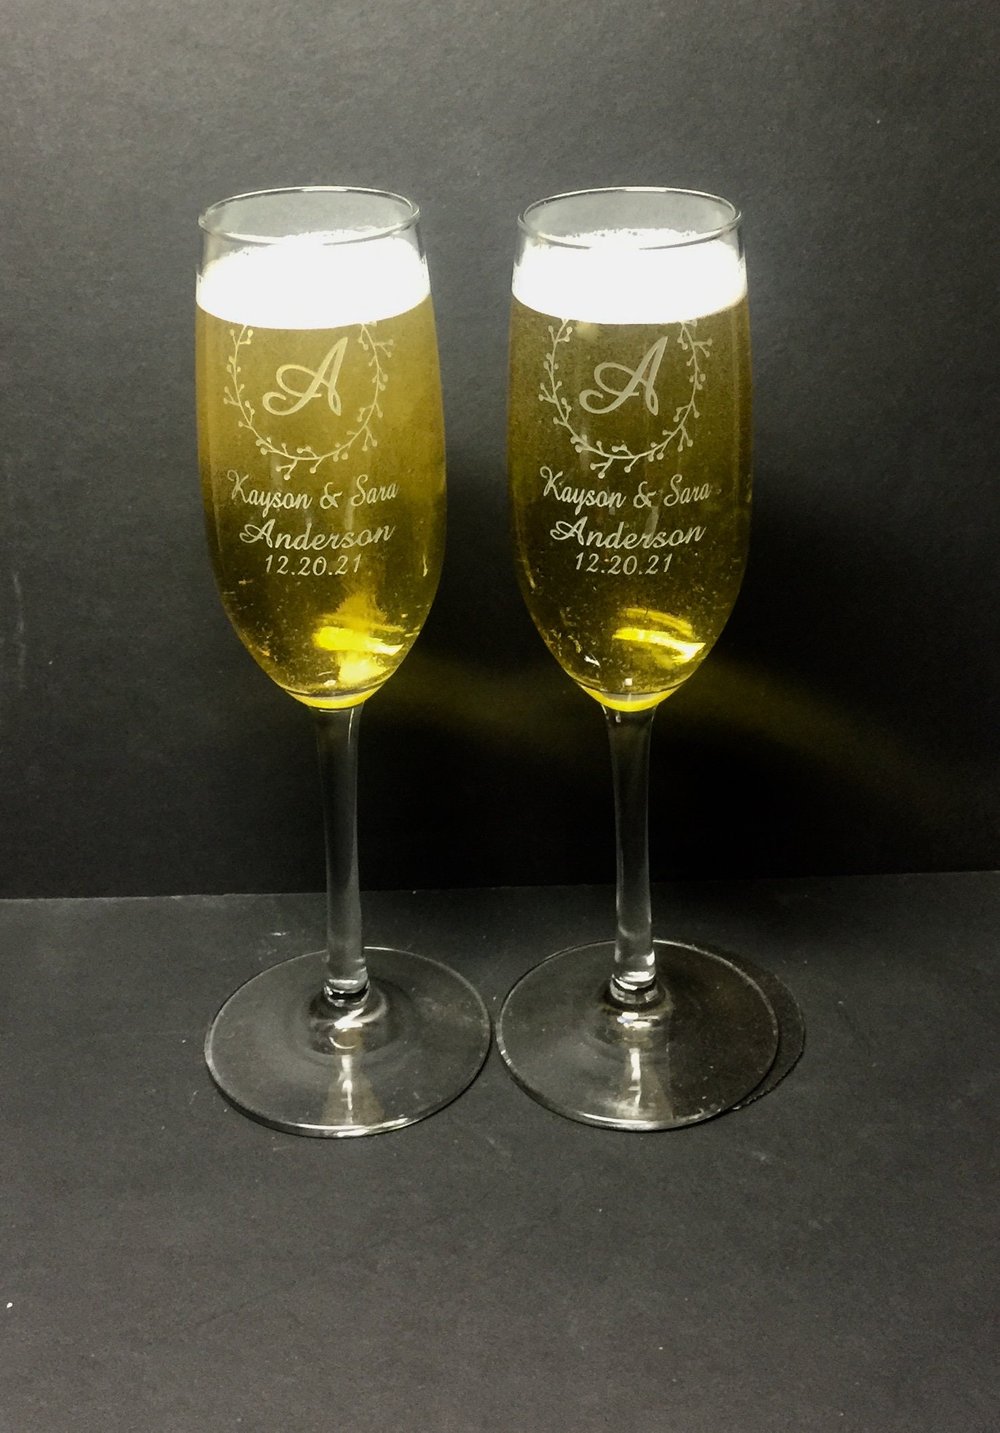 Bride & Groom Champagne Glass Set - Design: HH6 - Everything Etched